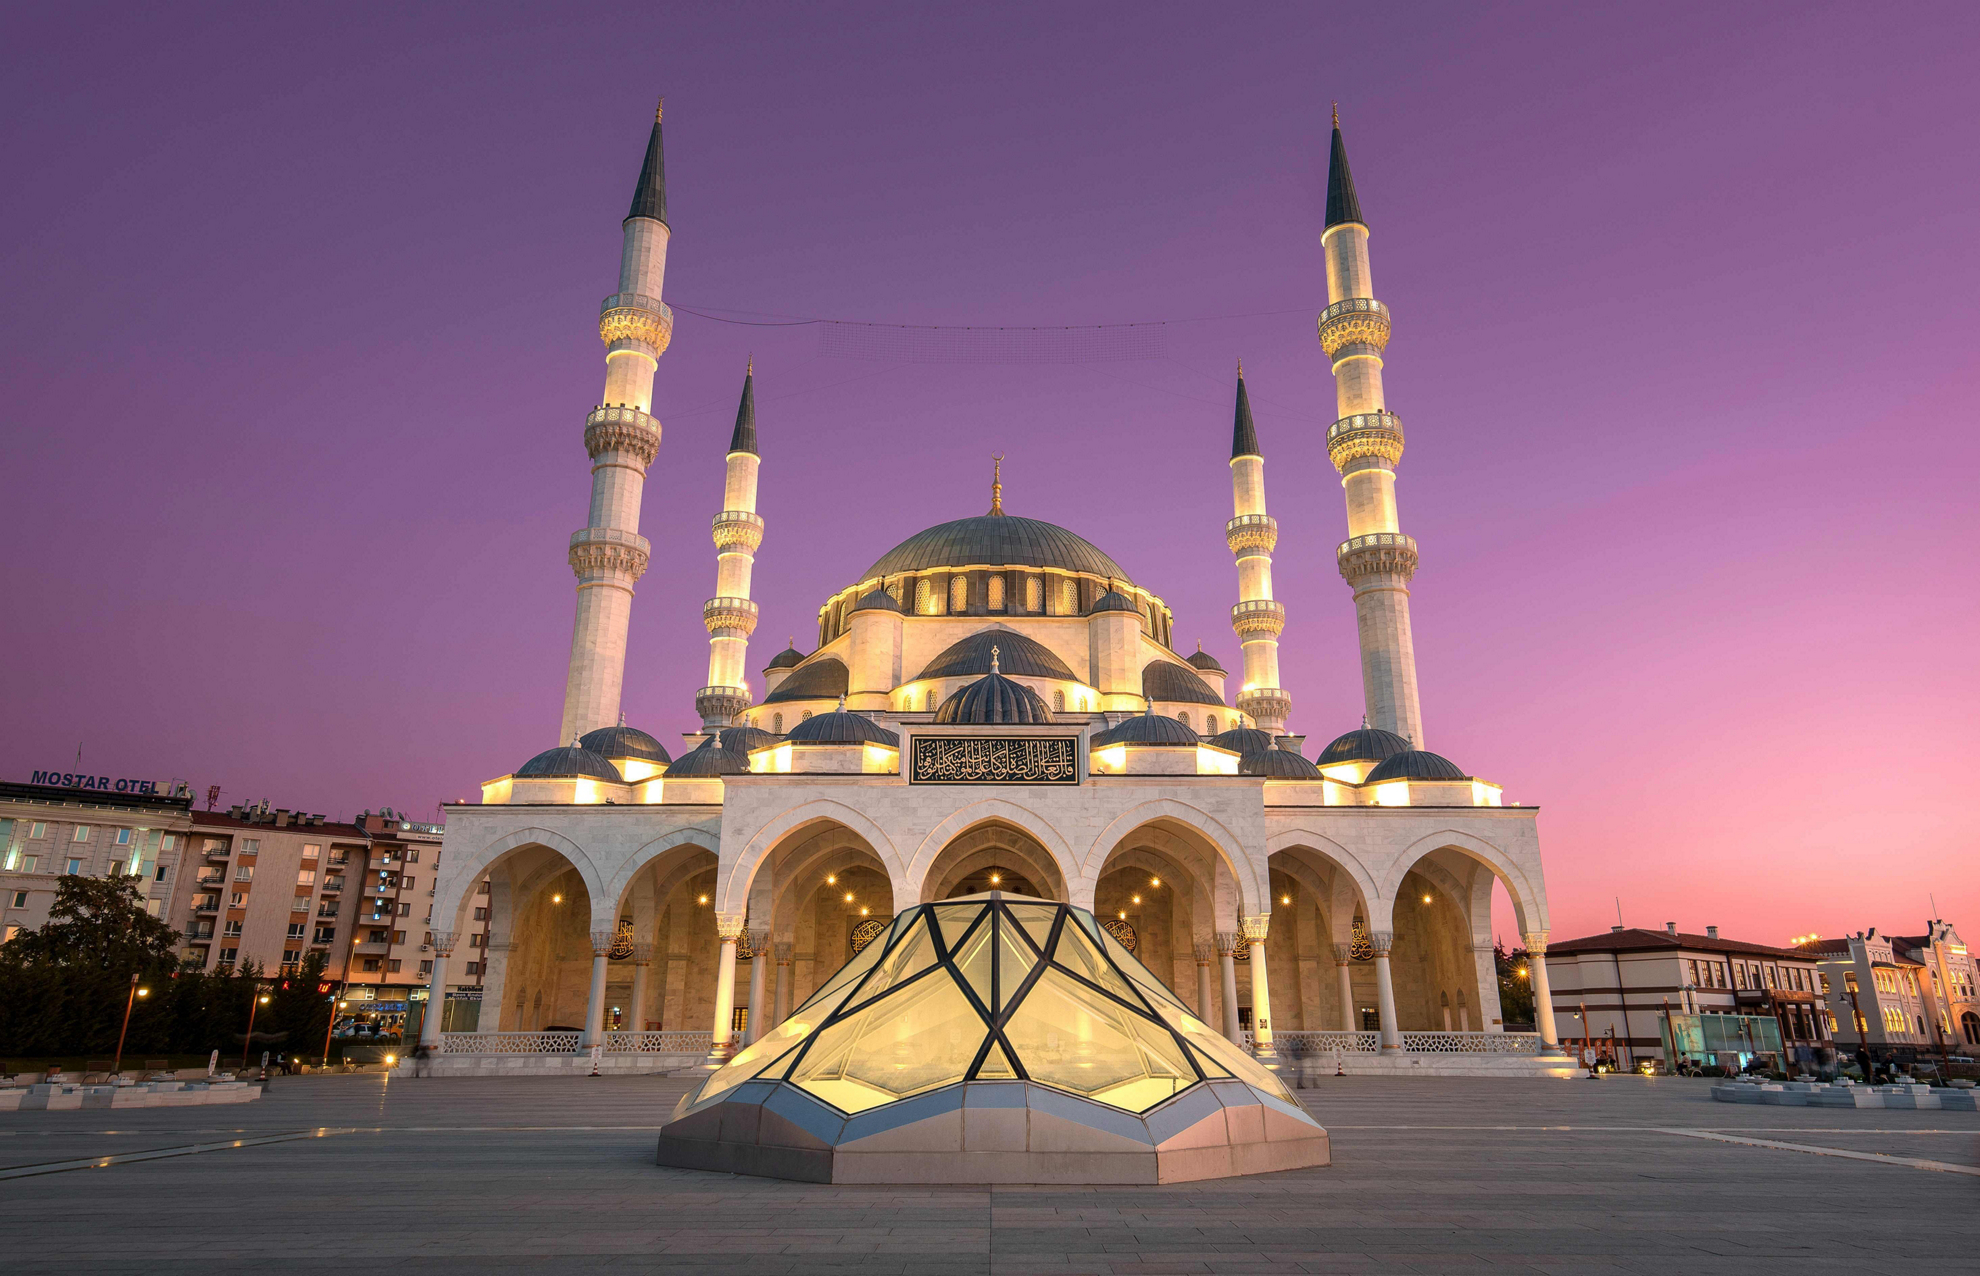 Ankara tourist attractions: A close-up of the Kocatepe Mosque at sunset